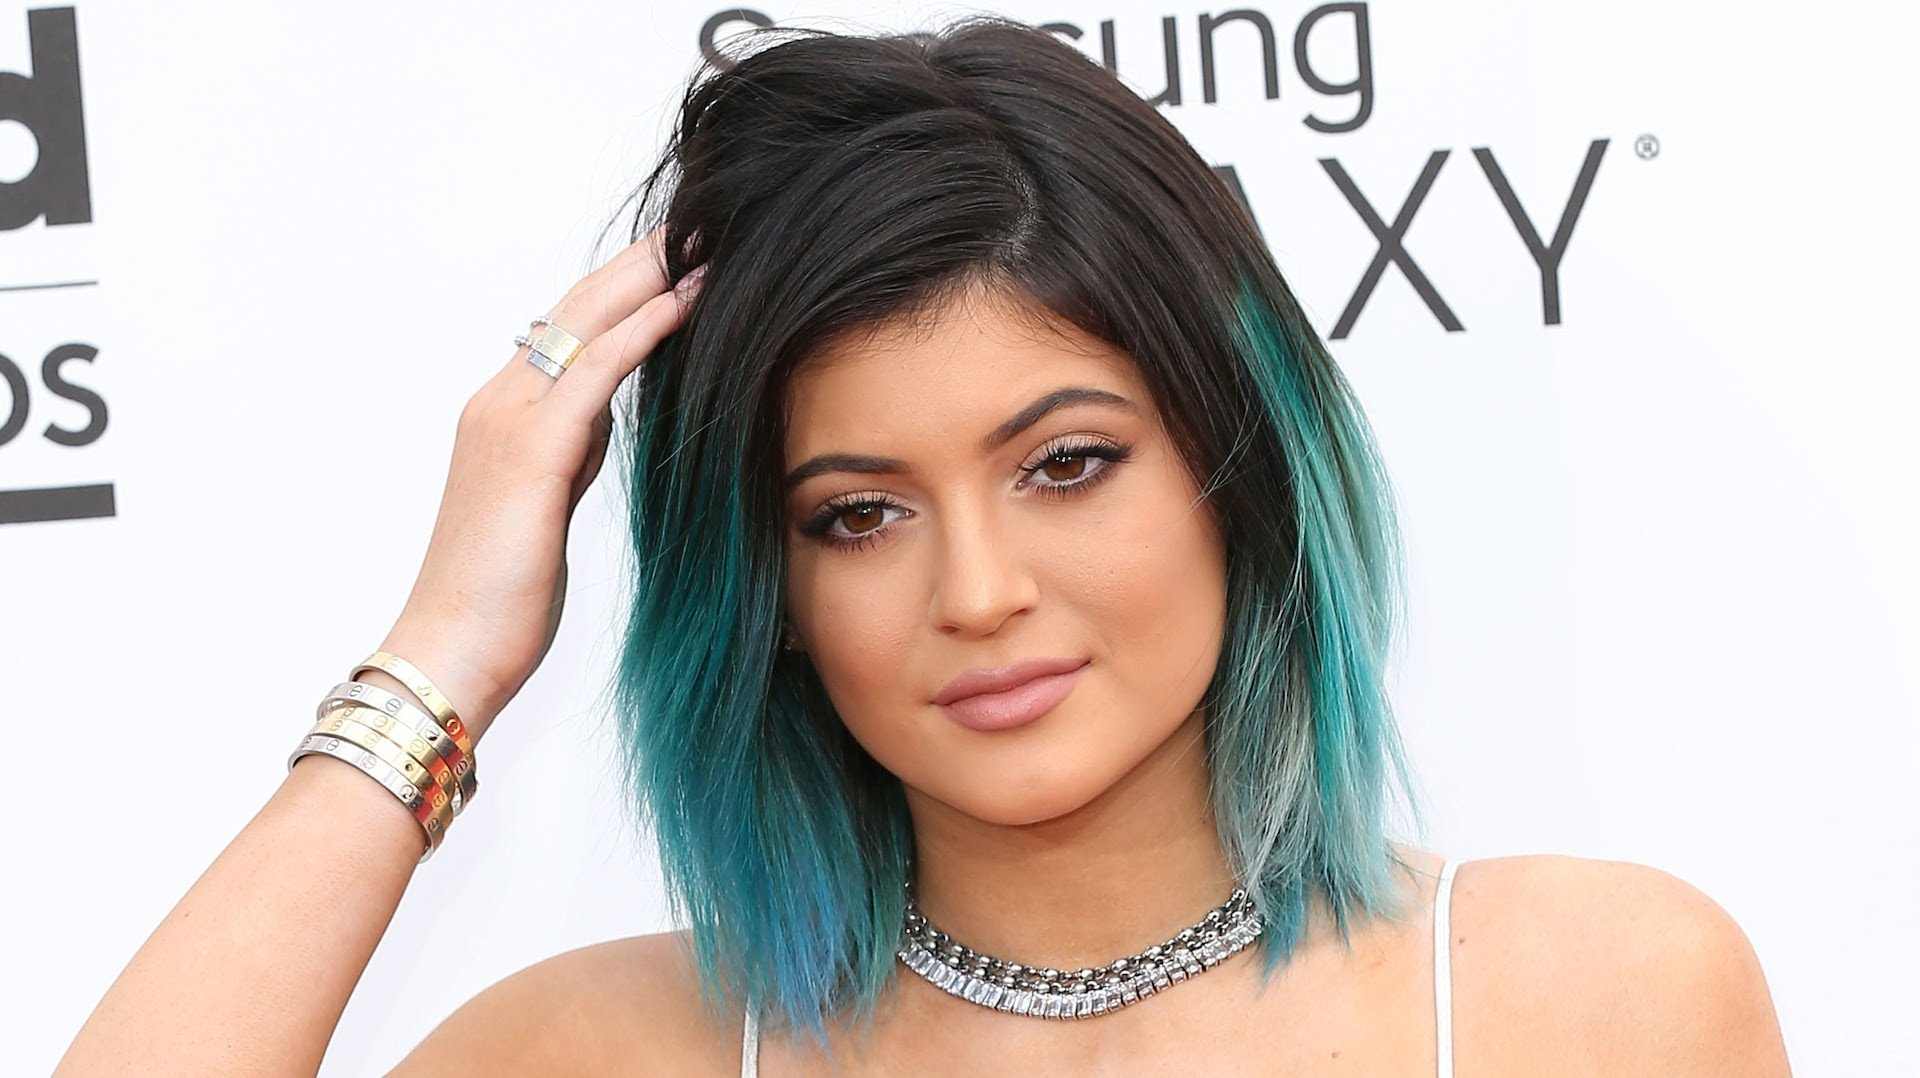 10. "Tips for Choosing the Right Shade of Pastel Blue for Ombre Hair" - wide 5